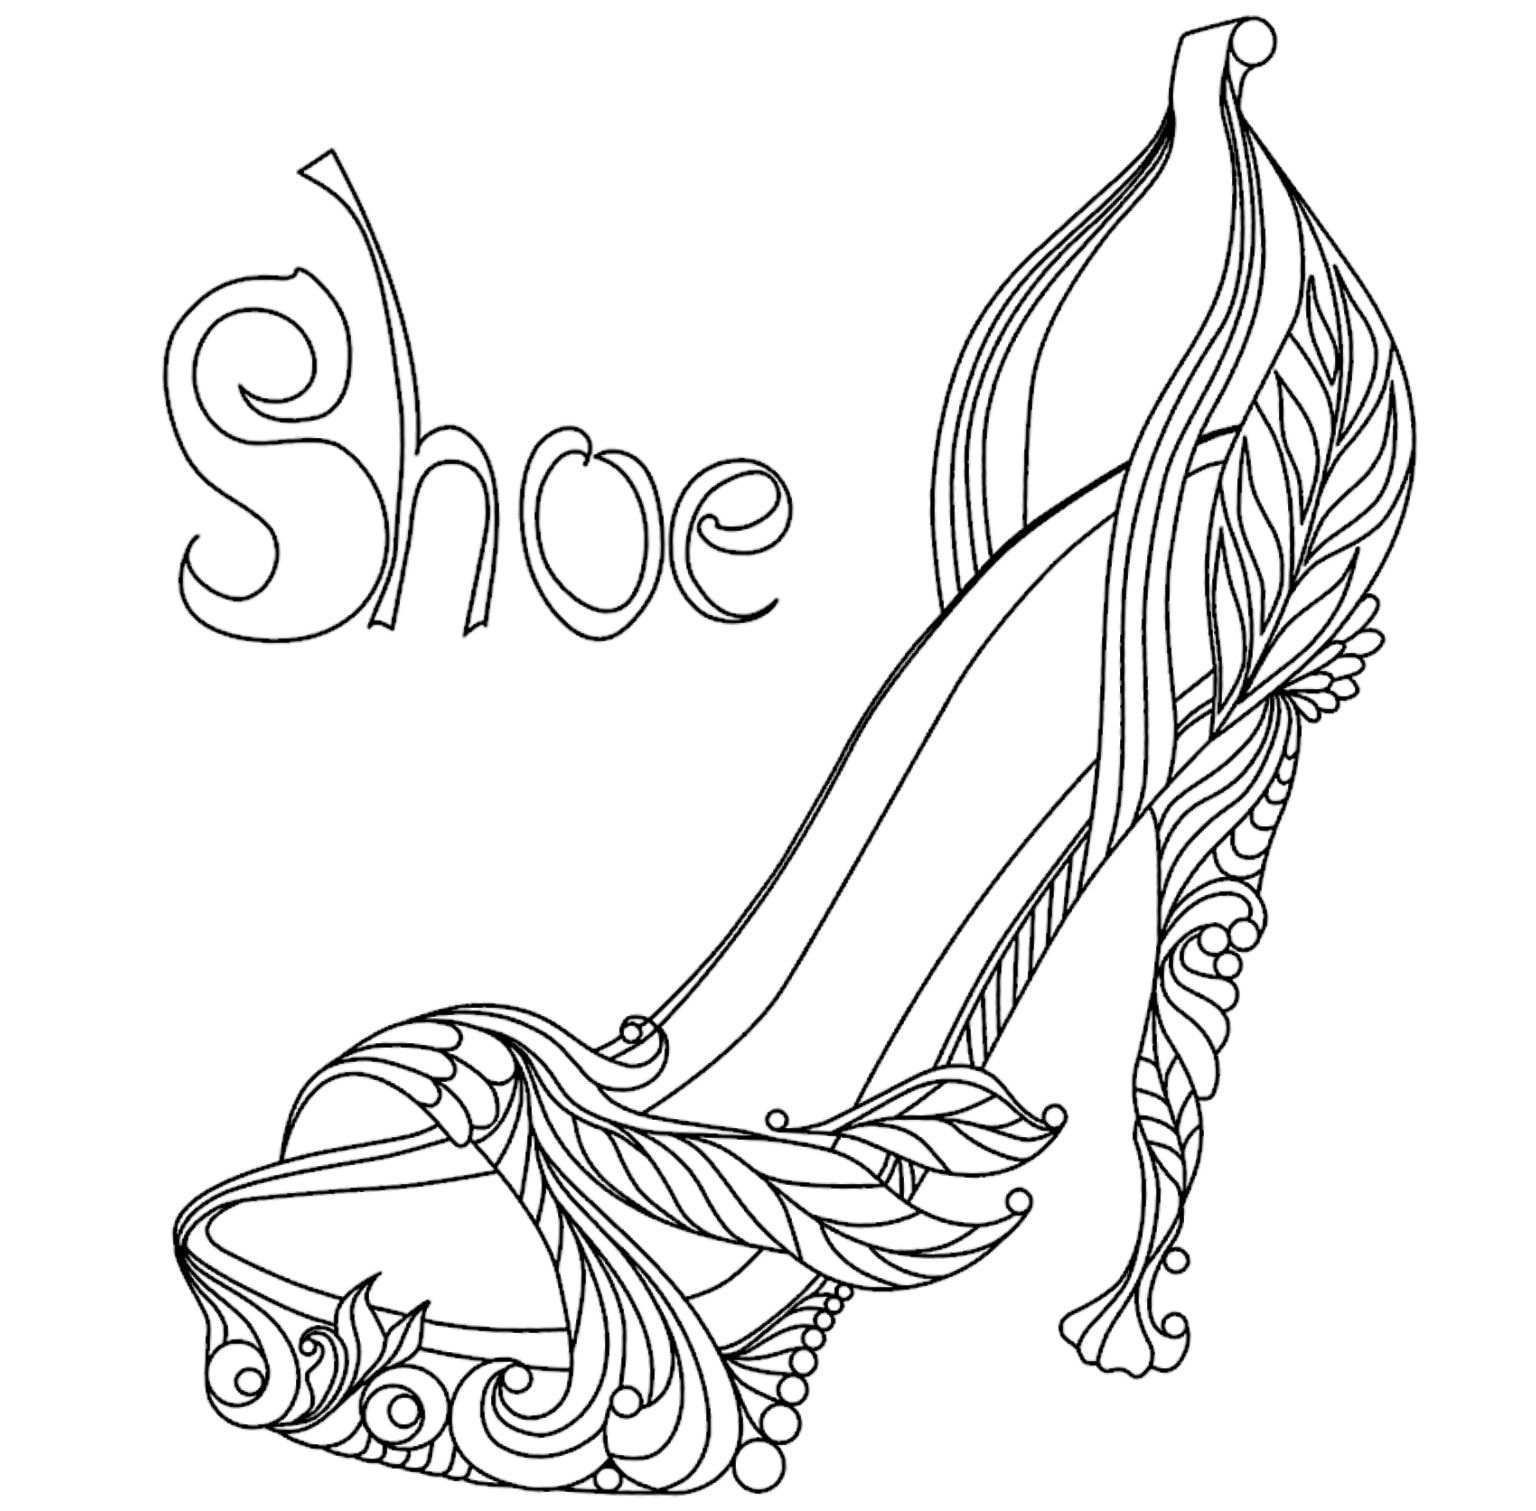 coloring pages for adults shoes sketchbook by kendra shedenhelm free coloring pages shoes pages for adults coloring 